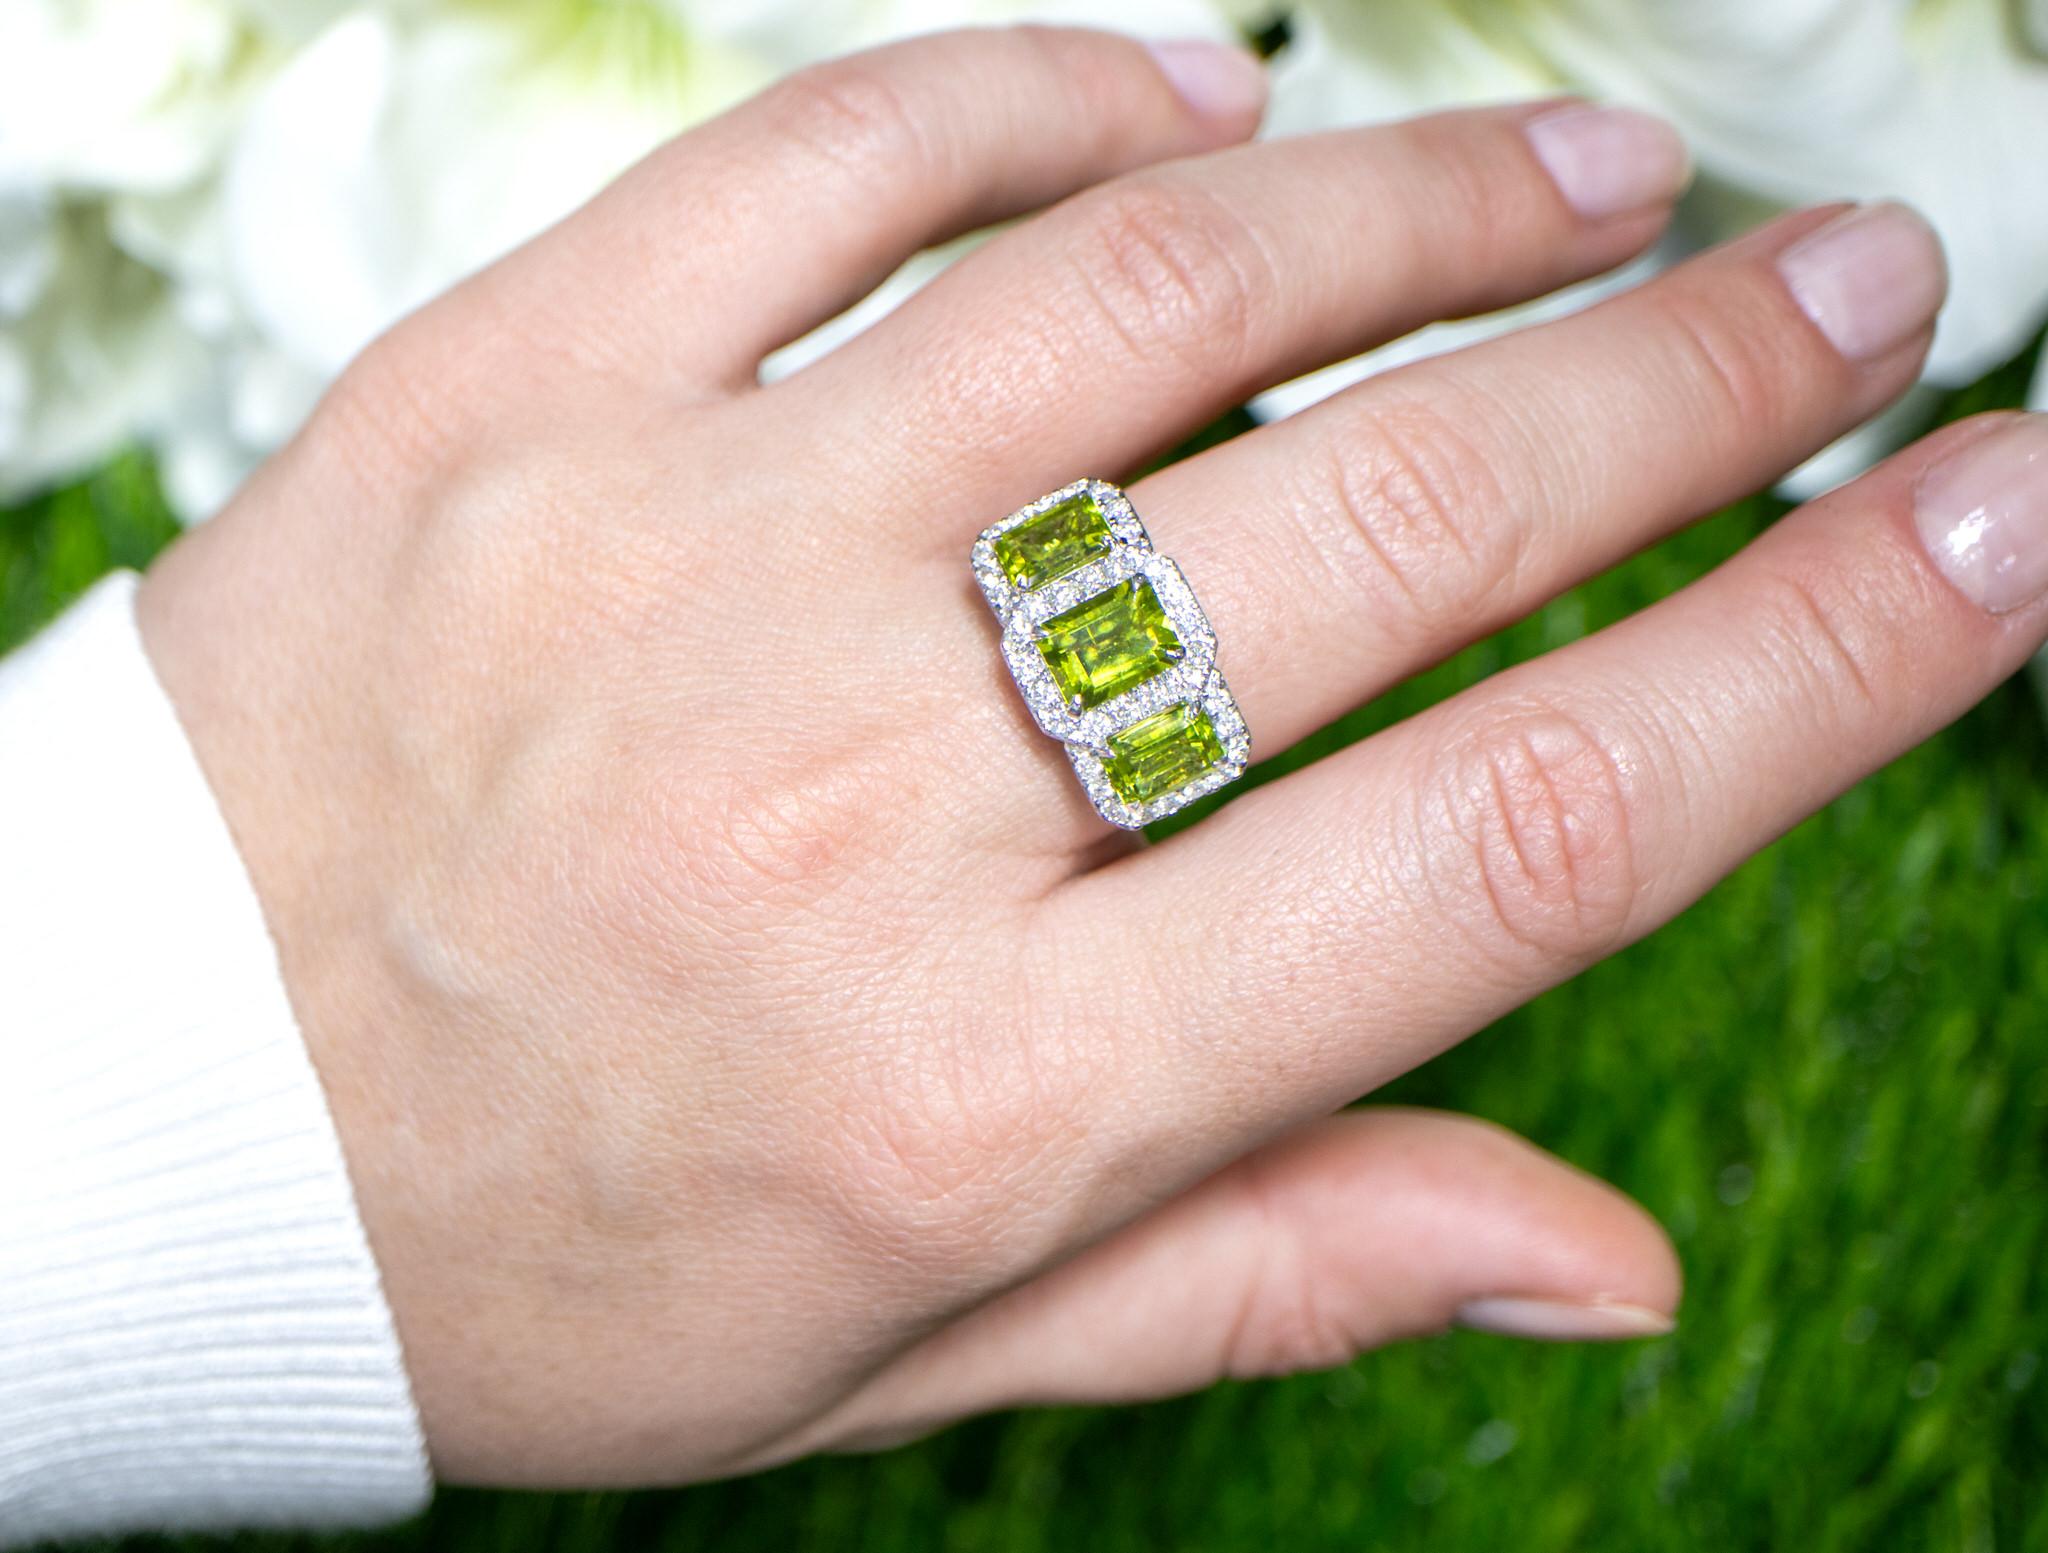 It comes with the Gemological Appraisal by GIA GG/AJP
All Gemstones are Natural
Peridots = 4.36 Carats
Diamonds = 0.78 Carats
Metal: 18K White Gold
Ring Size: 6.5* US
*It can be resized complimentary